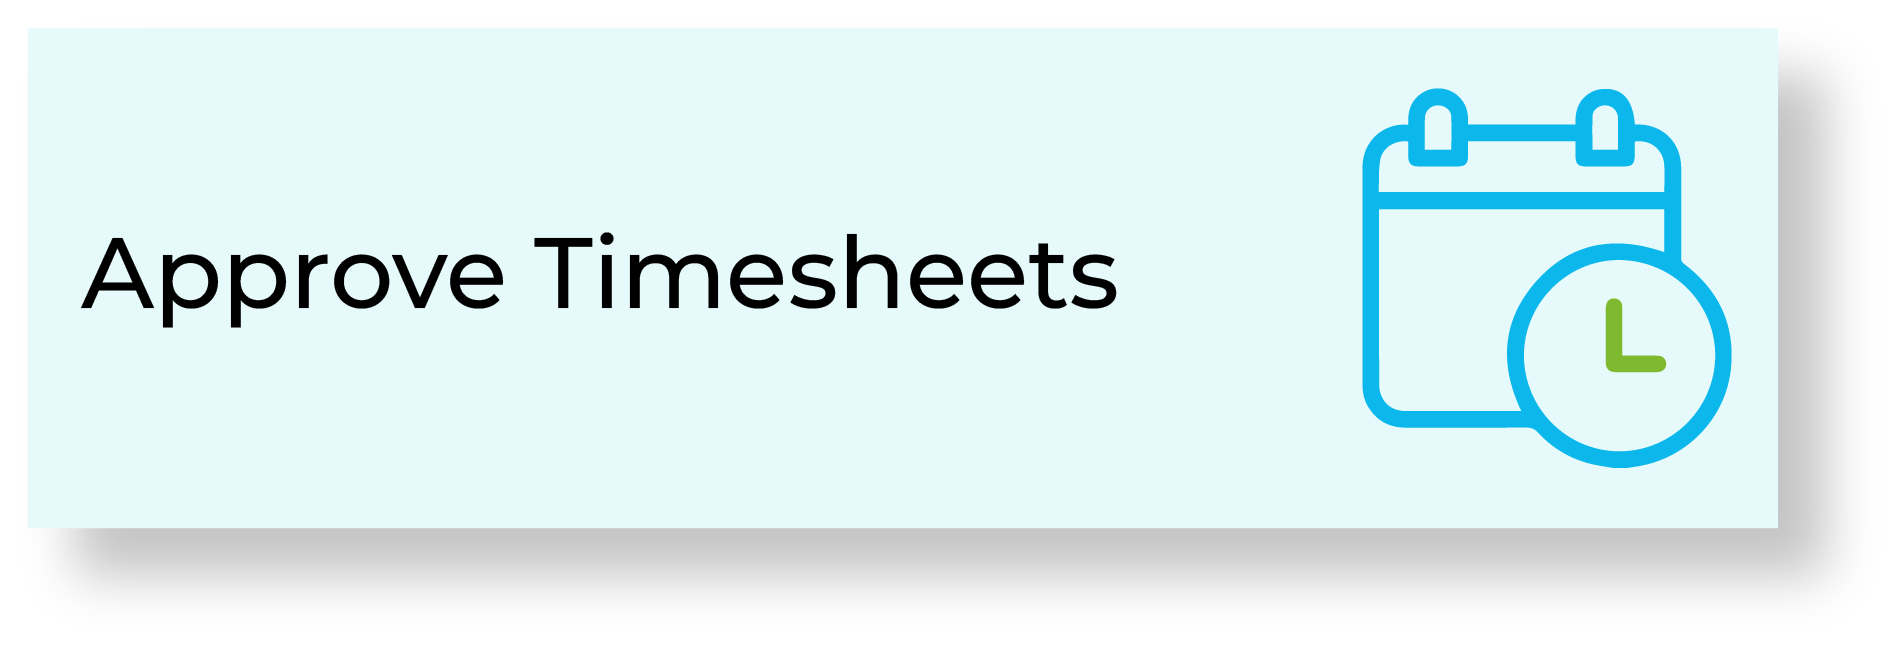 Approve Timesheets